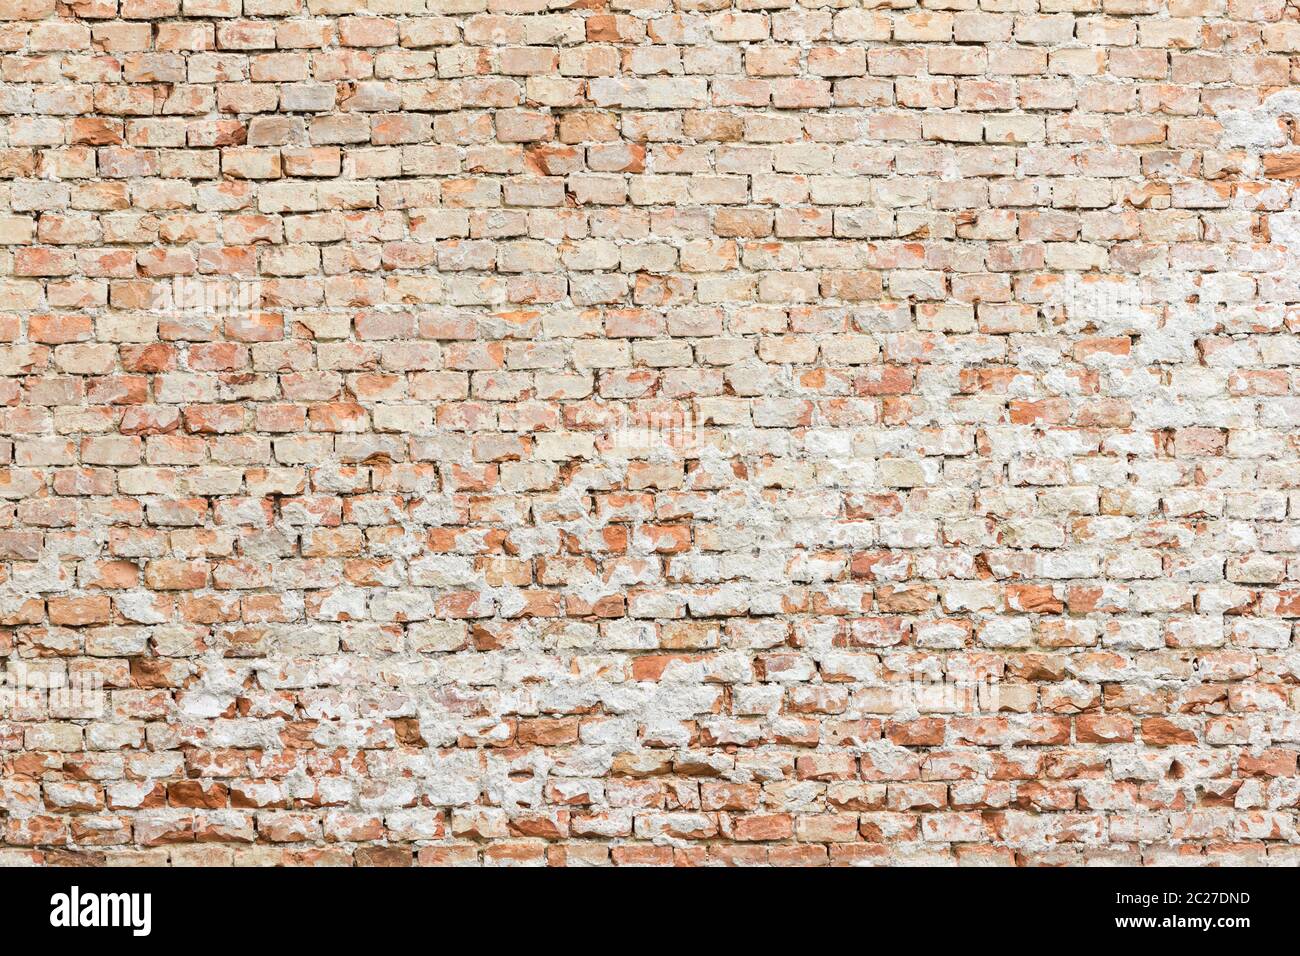 Urban dirty brick wall. Texture and design concept. Stock Photo